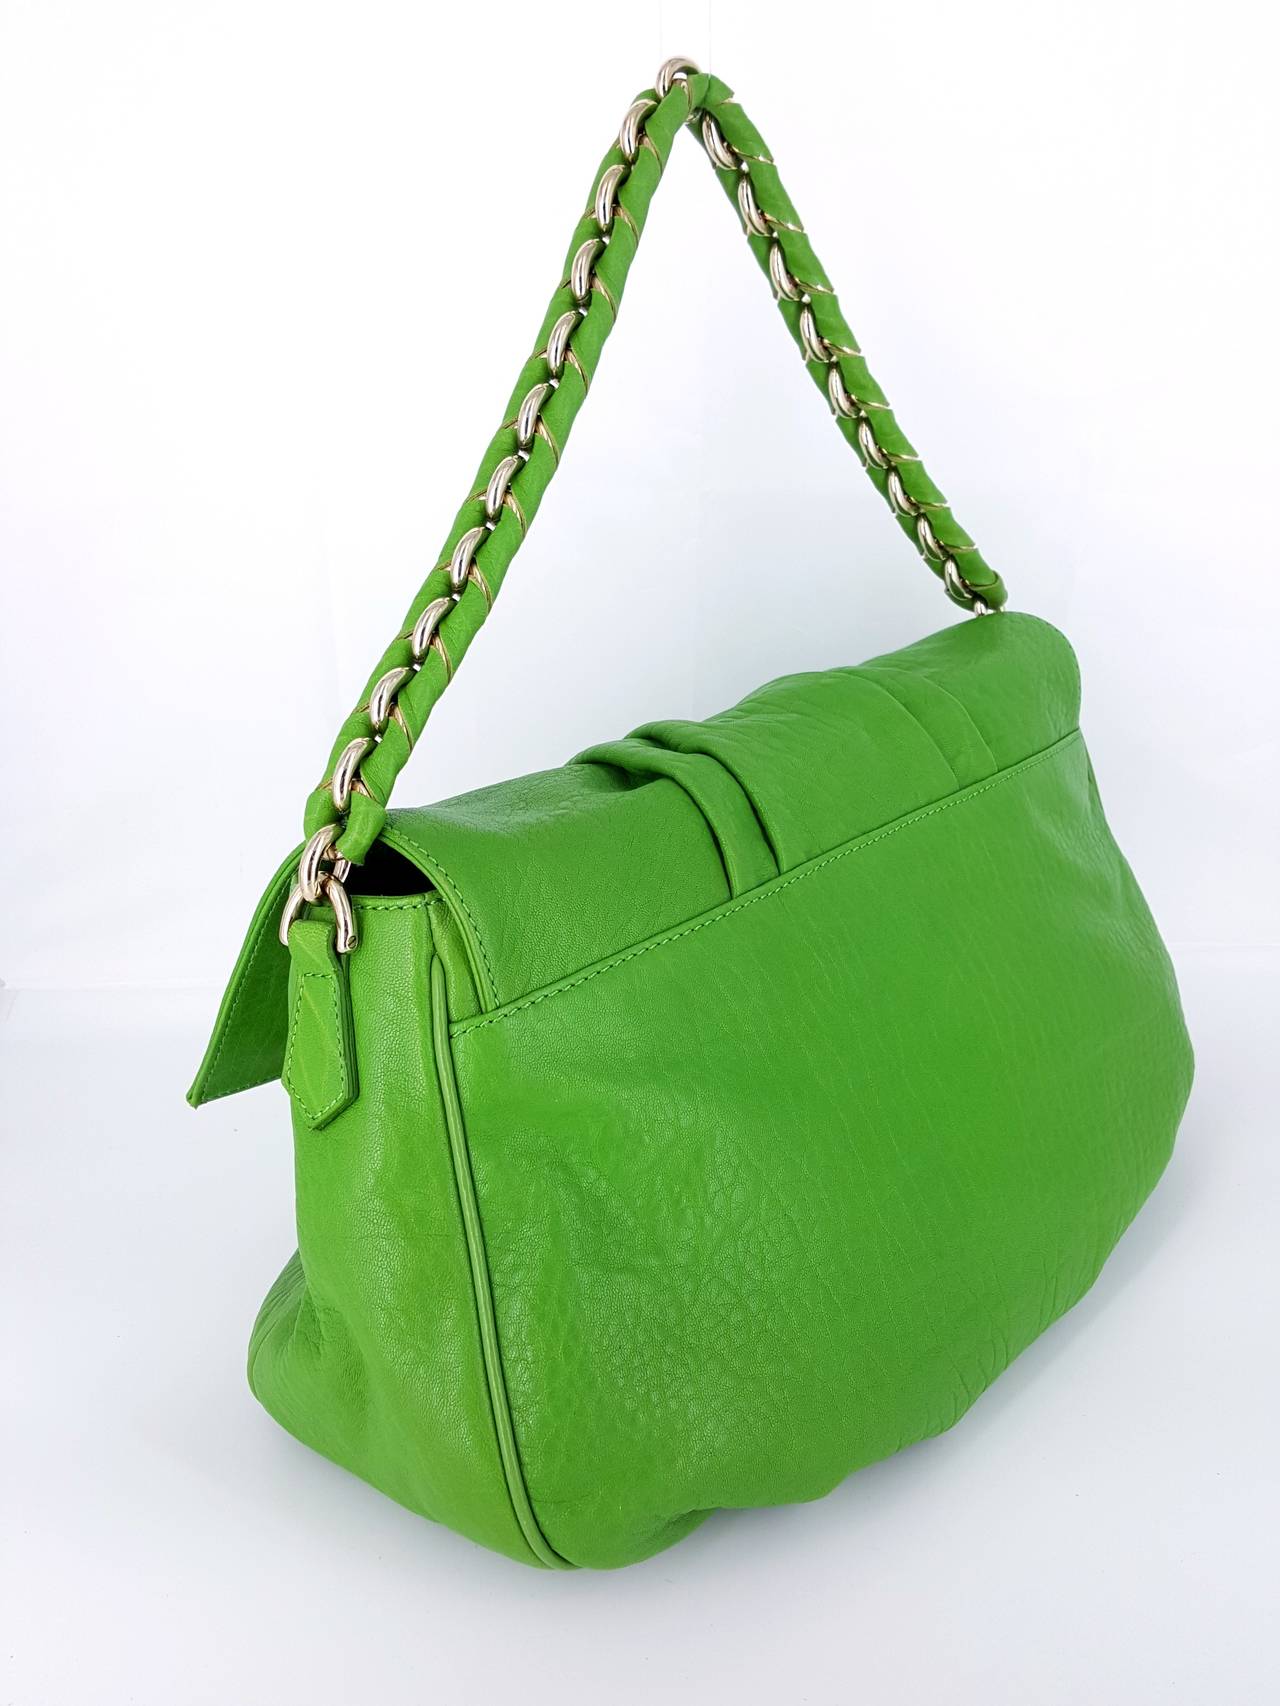 FENDI Kelly Green Leather Shoulder Bag With Silver Hardware. In Good Condition For Sale In Delray Beach, FL